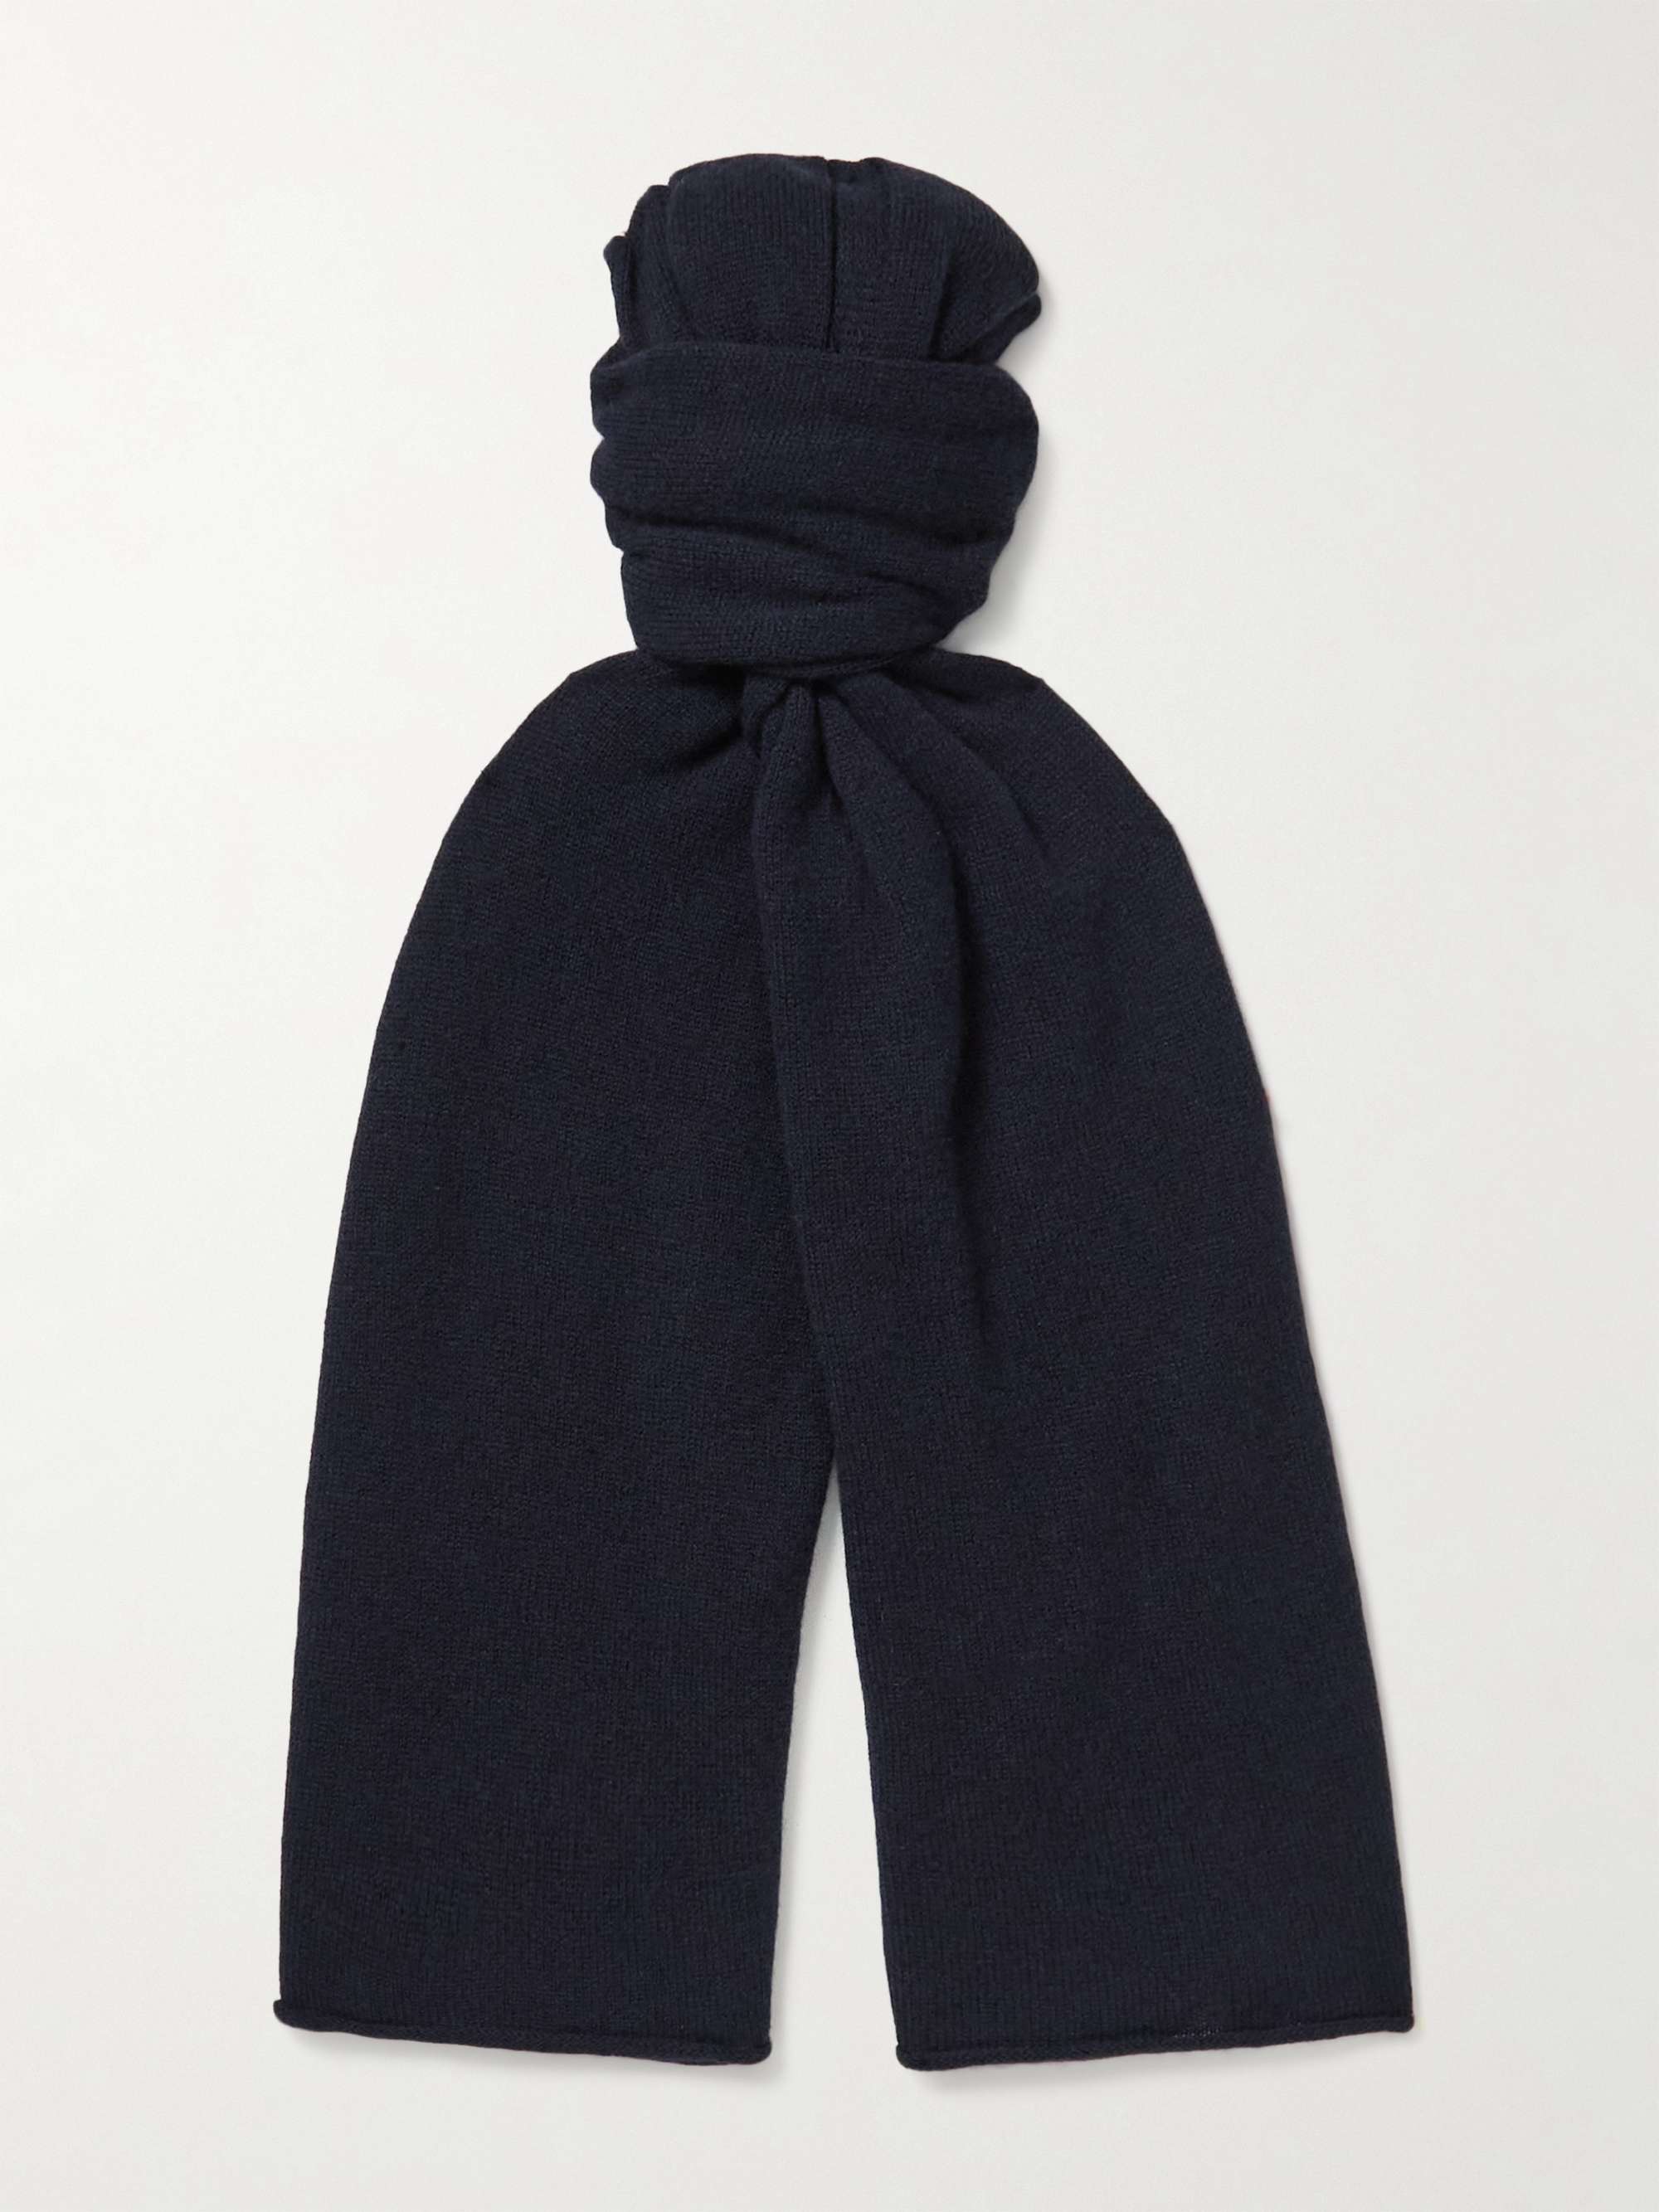 ANDERSON & SHEPPARD Ribbed Cashmere Scarf